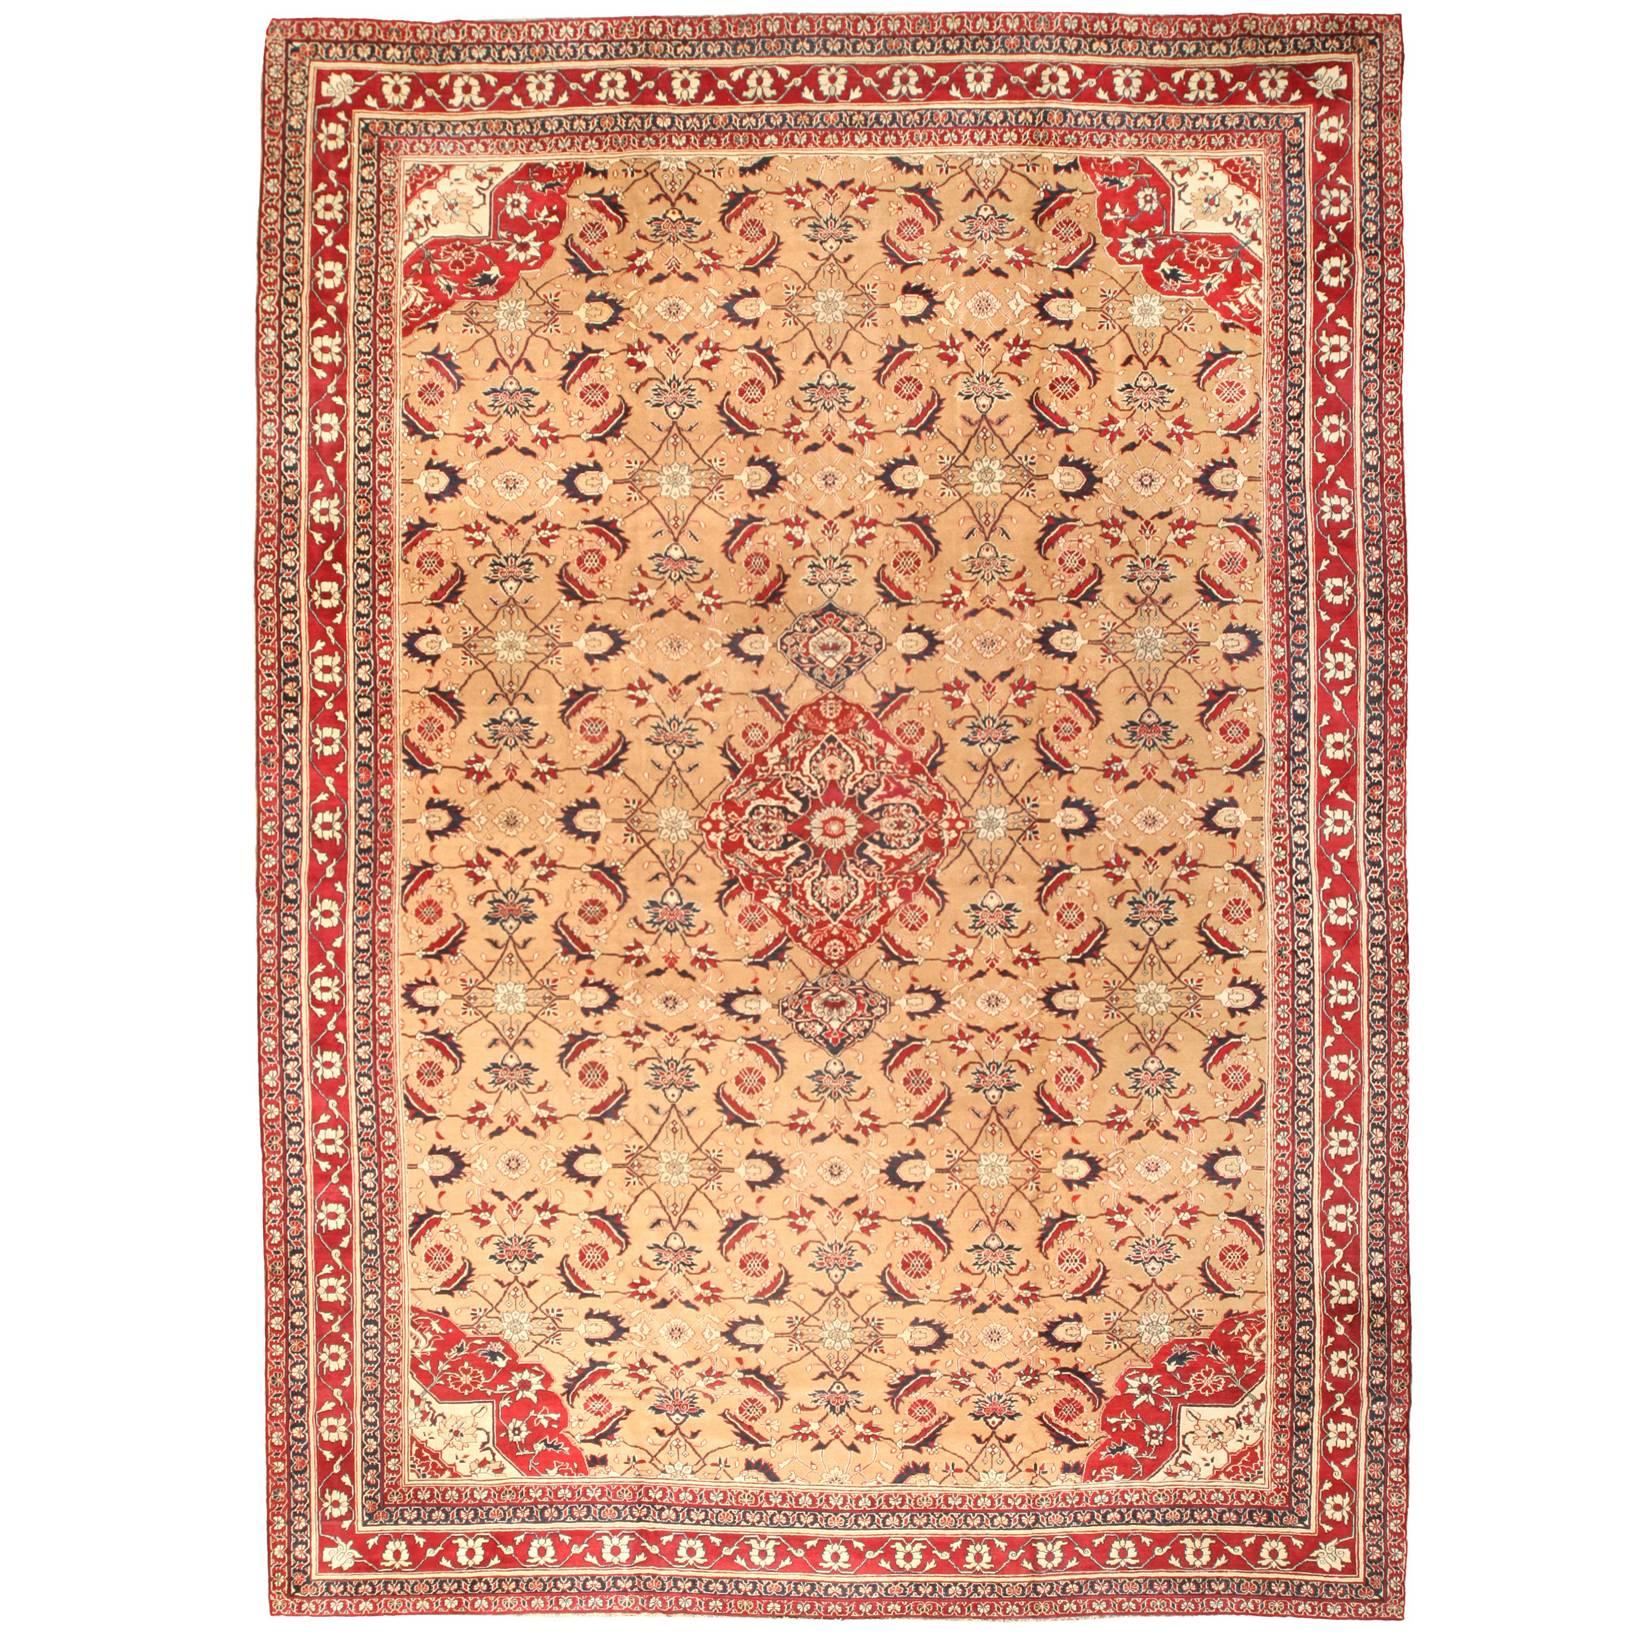 Antique 19th Century Oversize Indian Agra Carpet For Sale